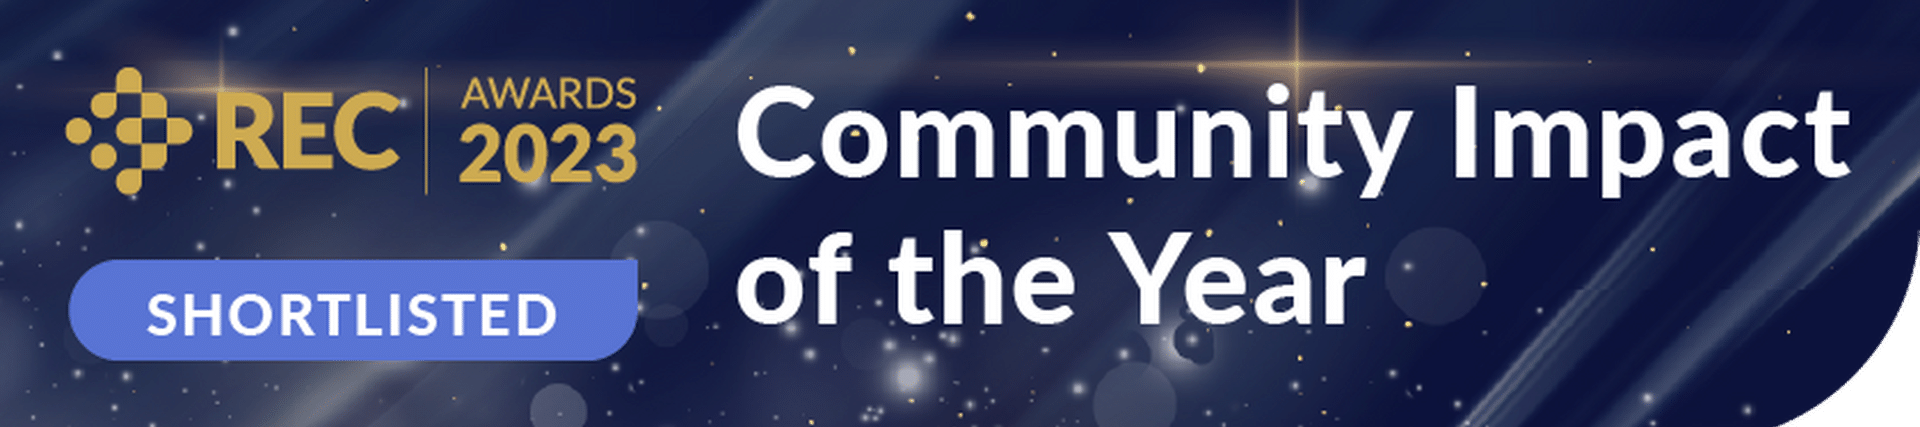 REC Community Impact of the Year